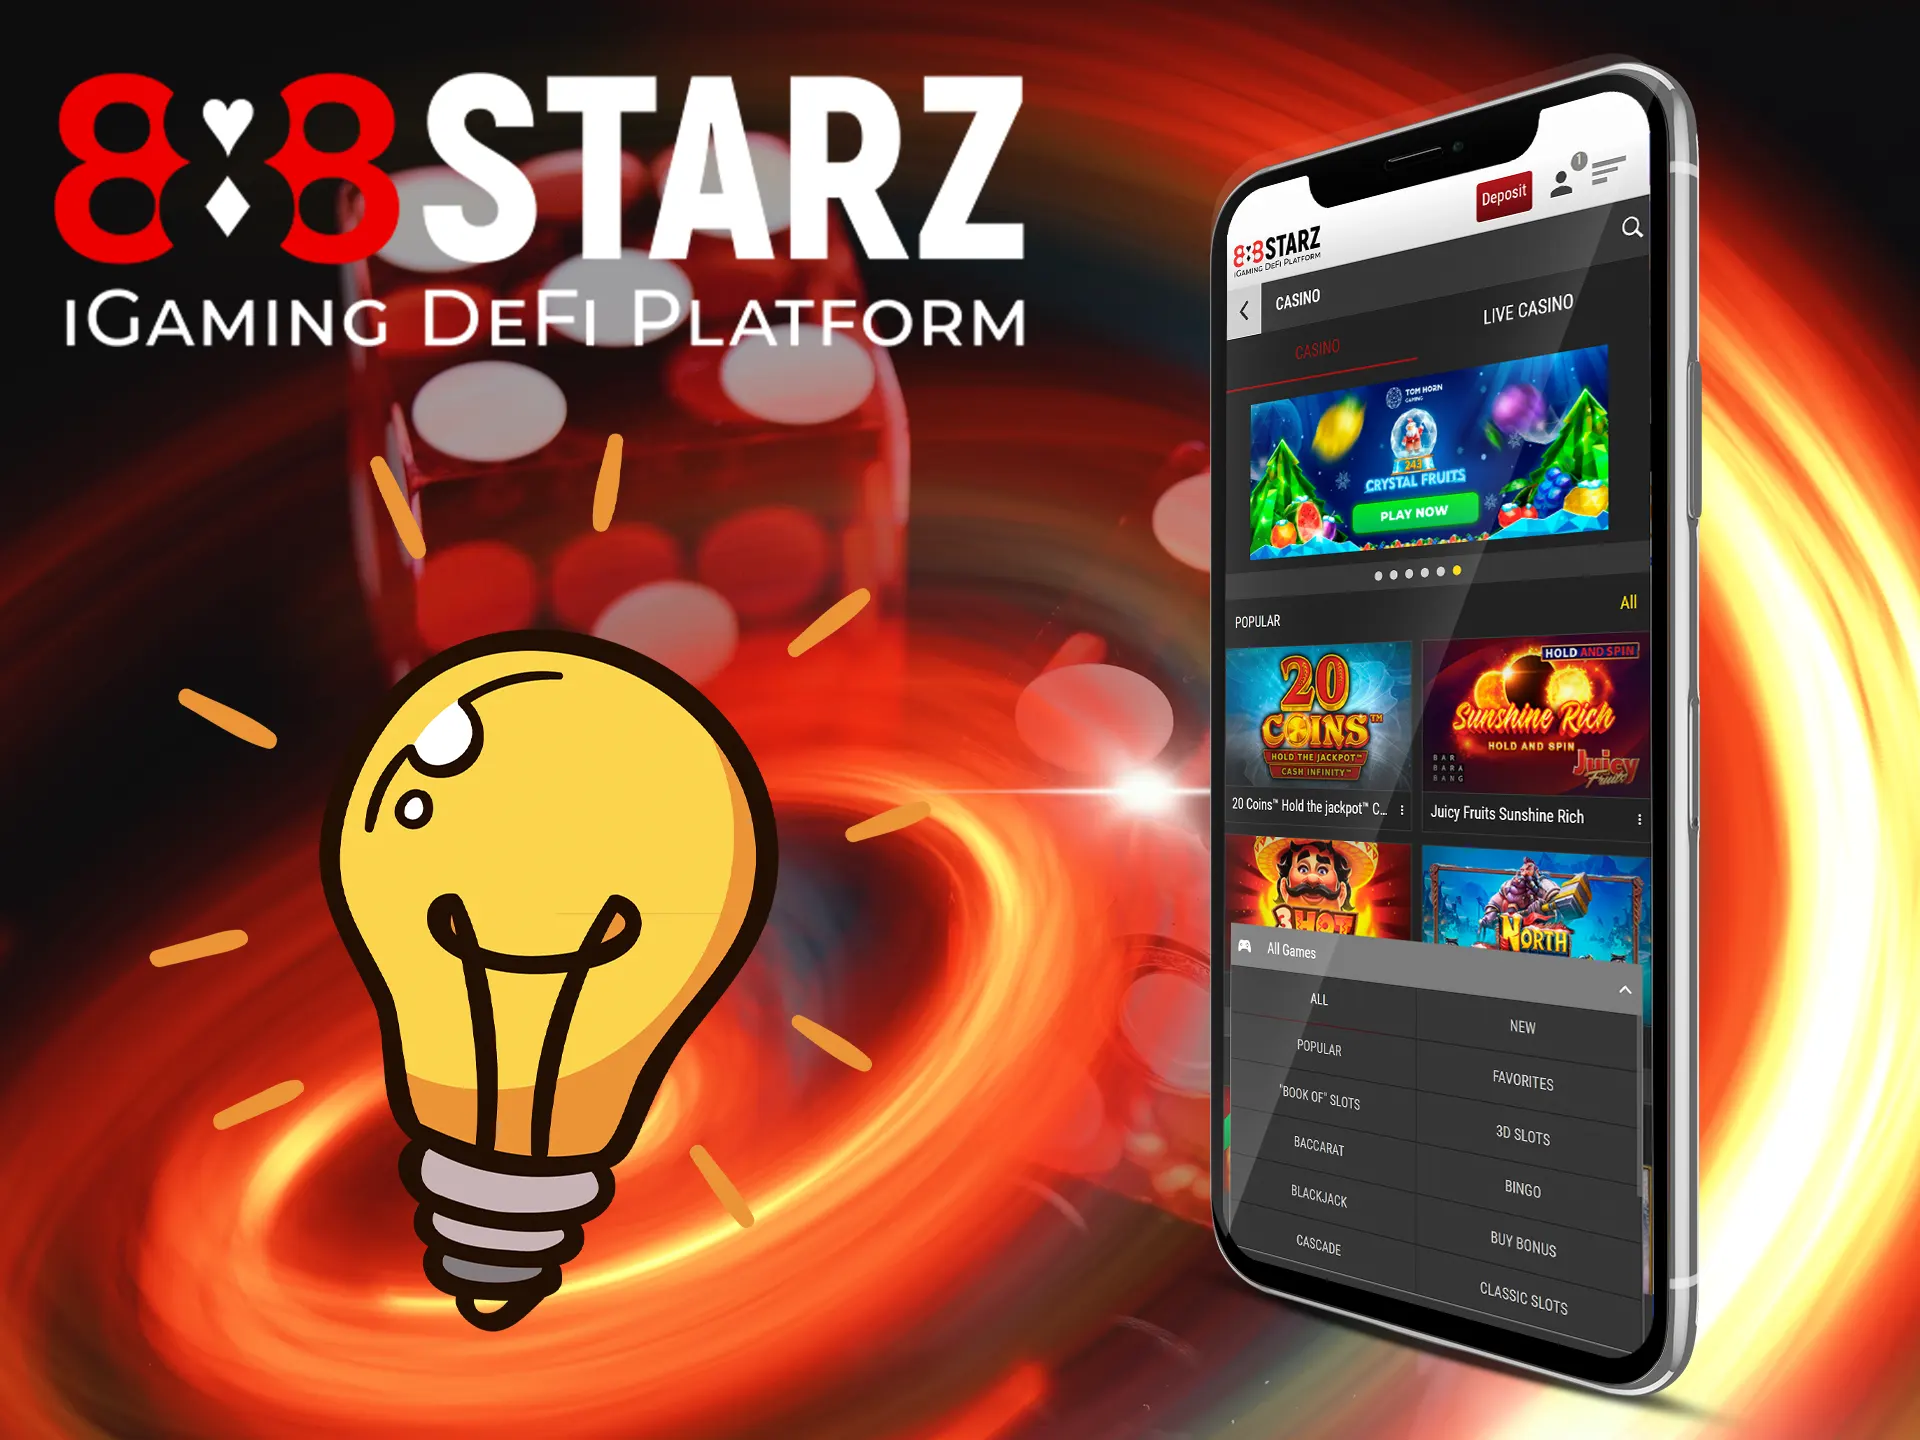 A large number of casino sub-species are waiting for you on the 888starz platform.